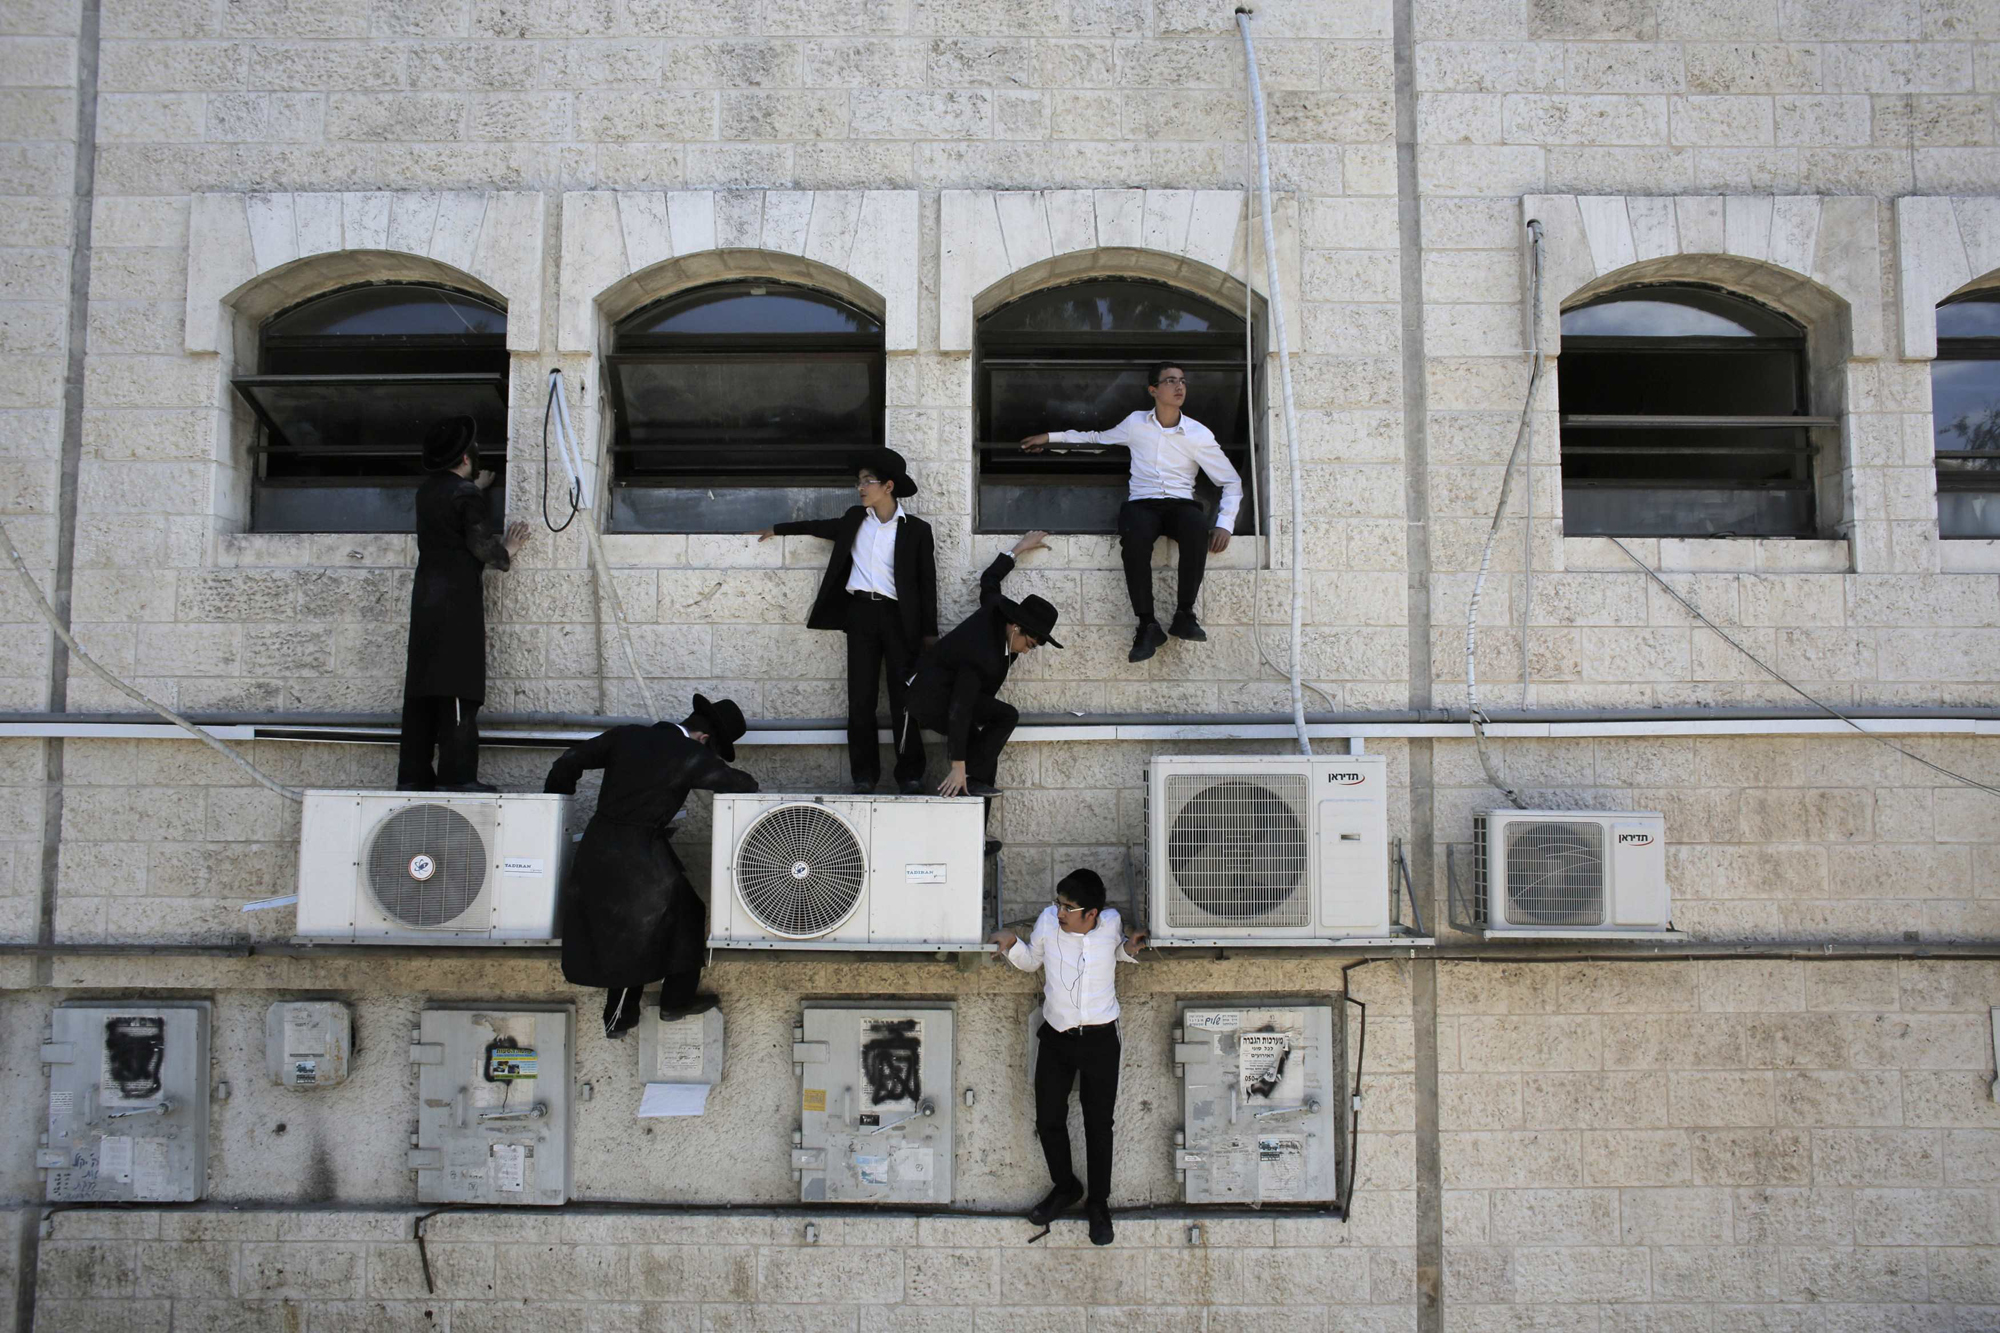 Ultra-Orthodox Jewish boys climb down a wall near the scene of a suspected attack in Jerusalem, Aug. 4, 2014.